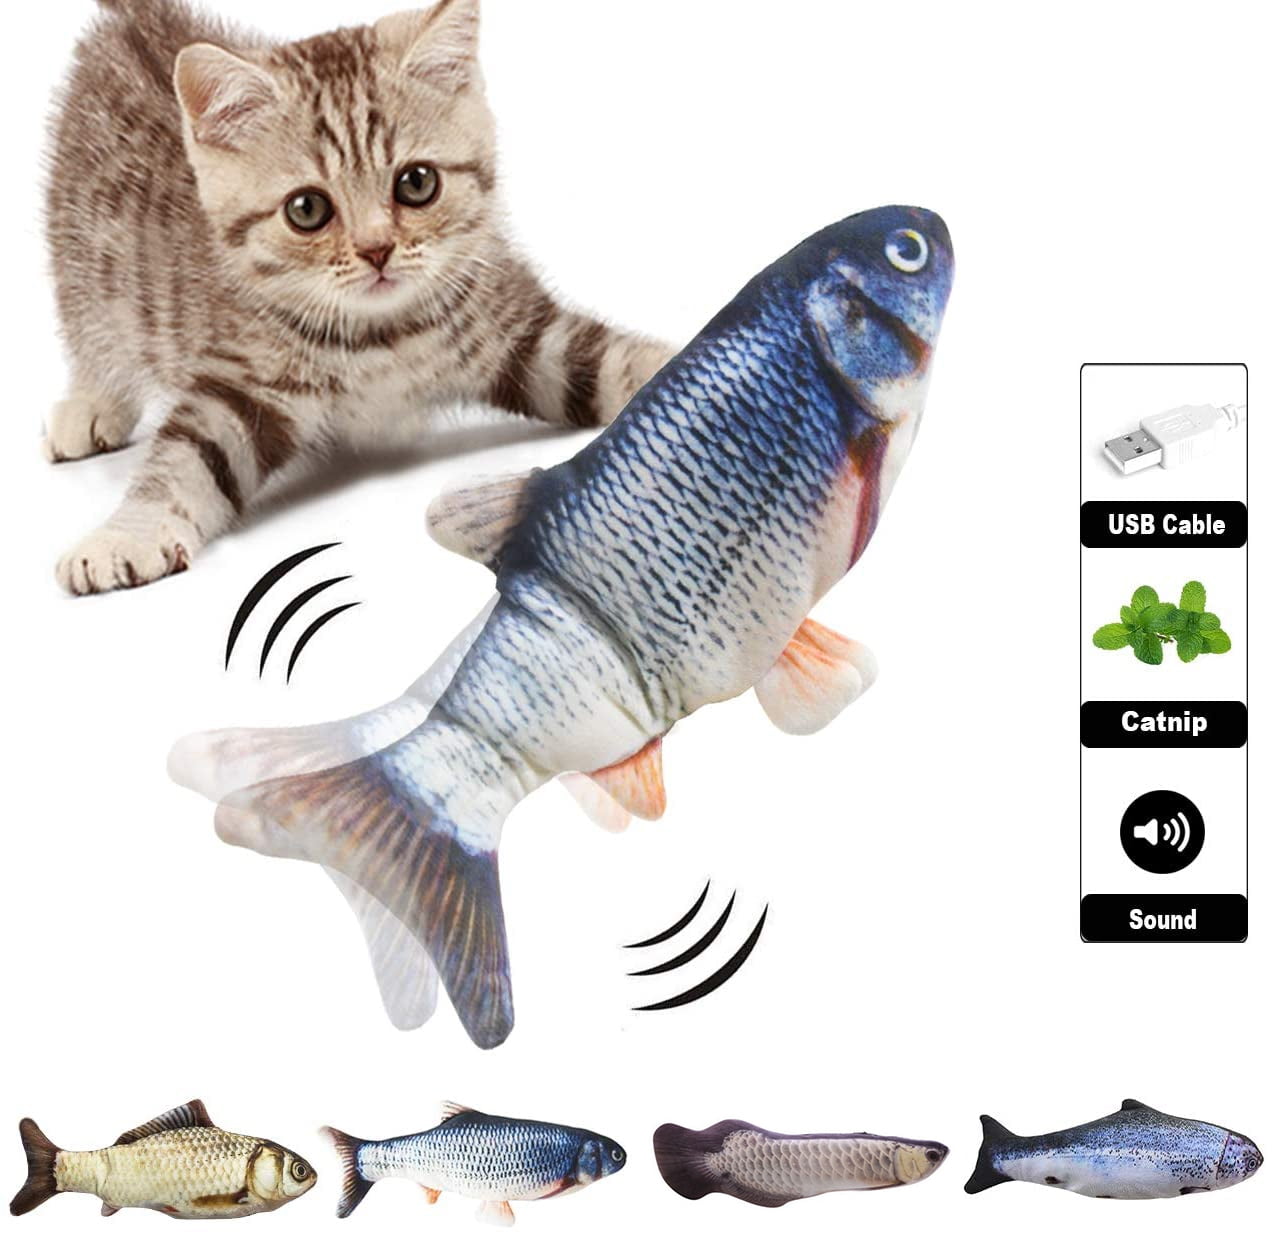 Realistic Plush Simulation Wiggle Fish Cat Kicker Fish Toy Pets Chew Bite Supplies for Kitten Cat Electric Floppy Fish Cat Toys 11 Interactive Moving Fish Catnip Toys